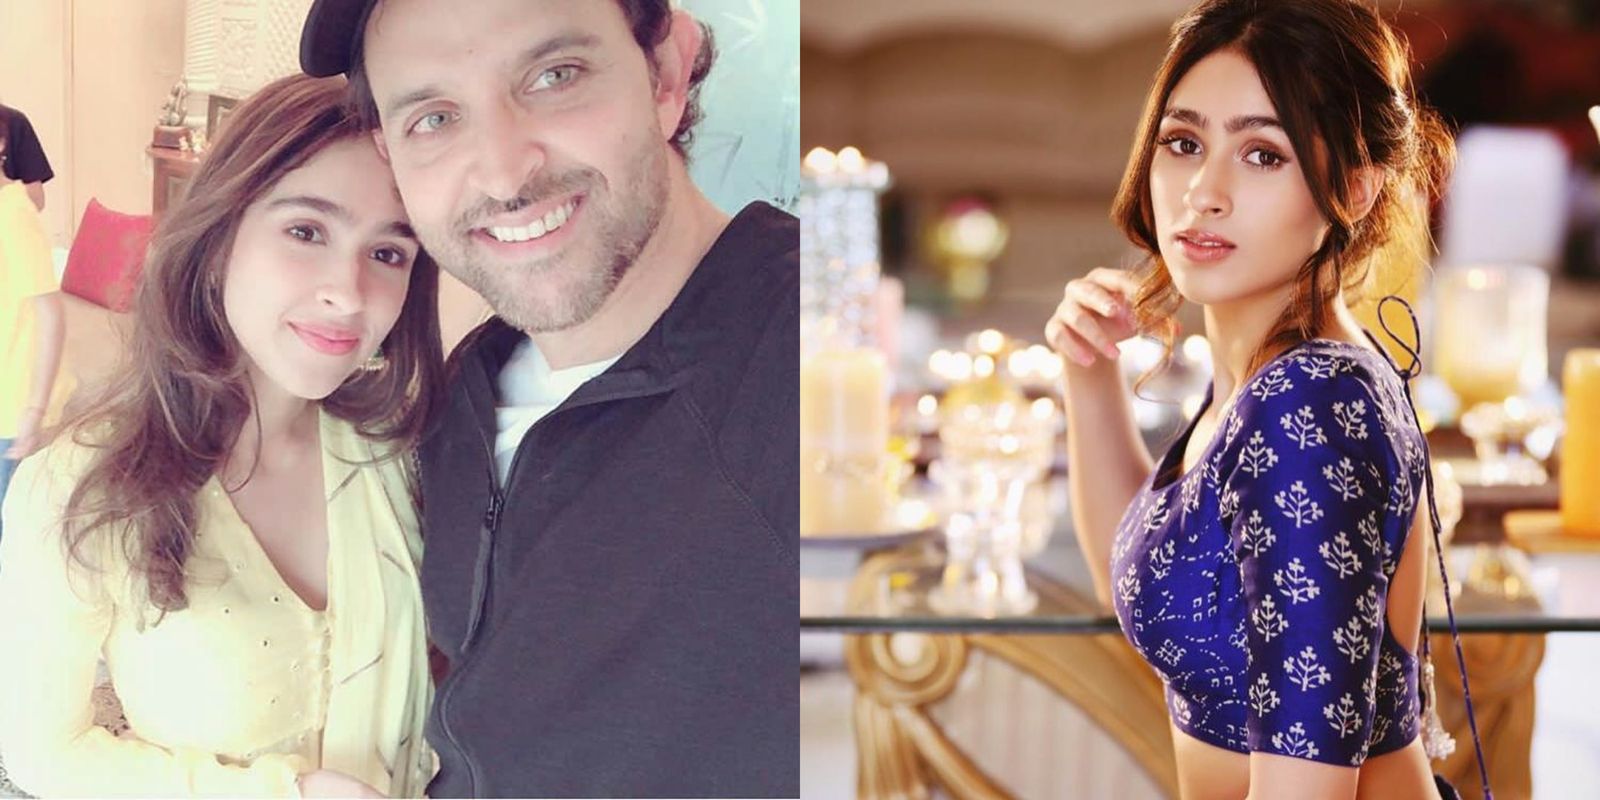 Hrithik Roshan Shares A Special Post For His Cousin Pashmina Ahead Of Her Bollywood Debut